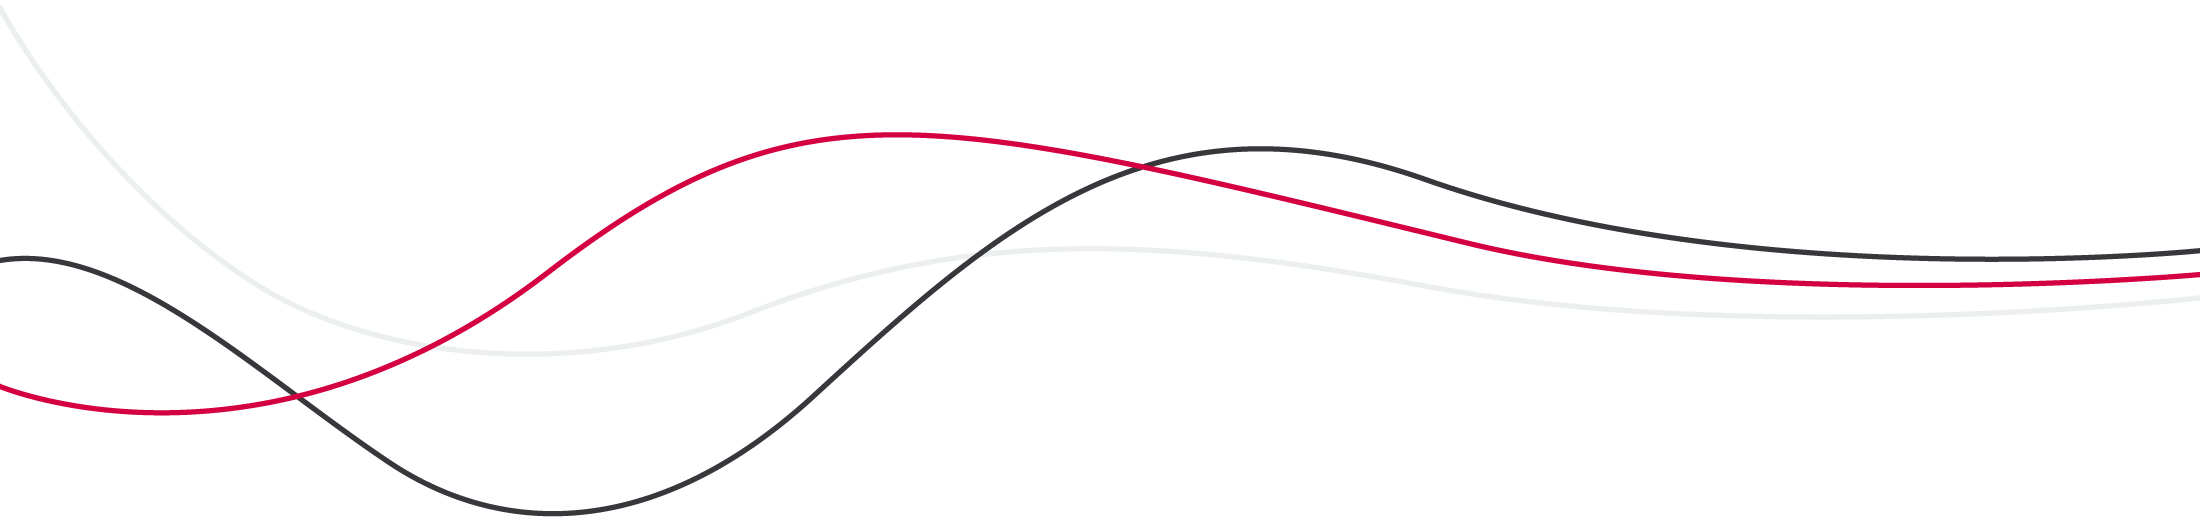 Three wavy lines — red, black, and light grey — running from left to right converging and straightening in the end.